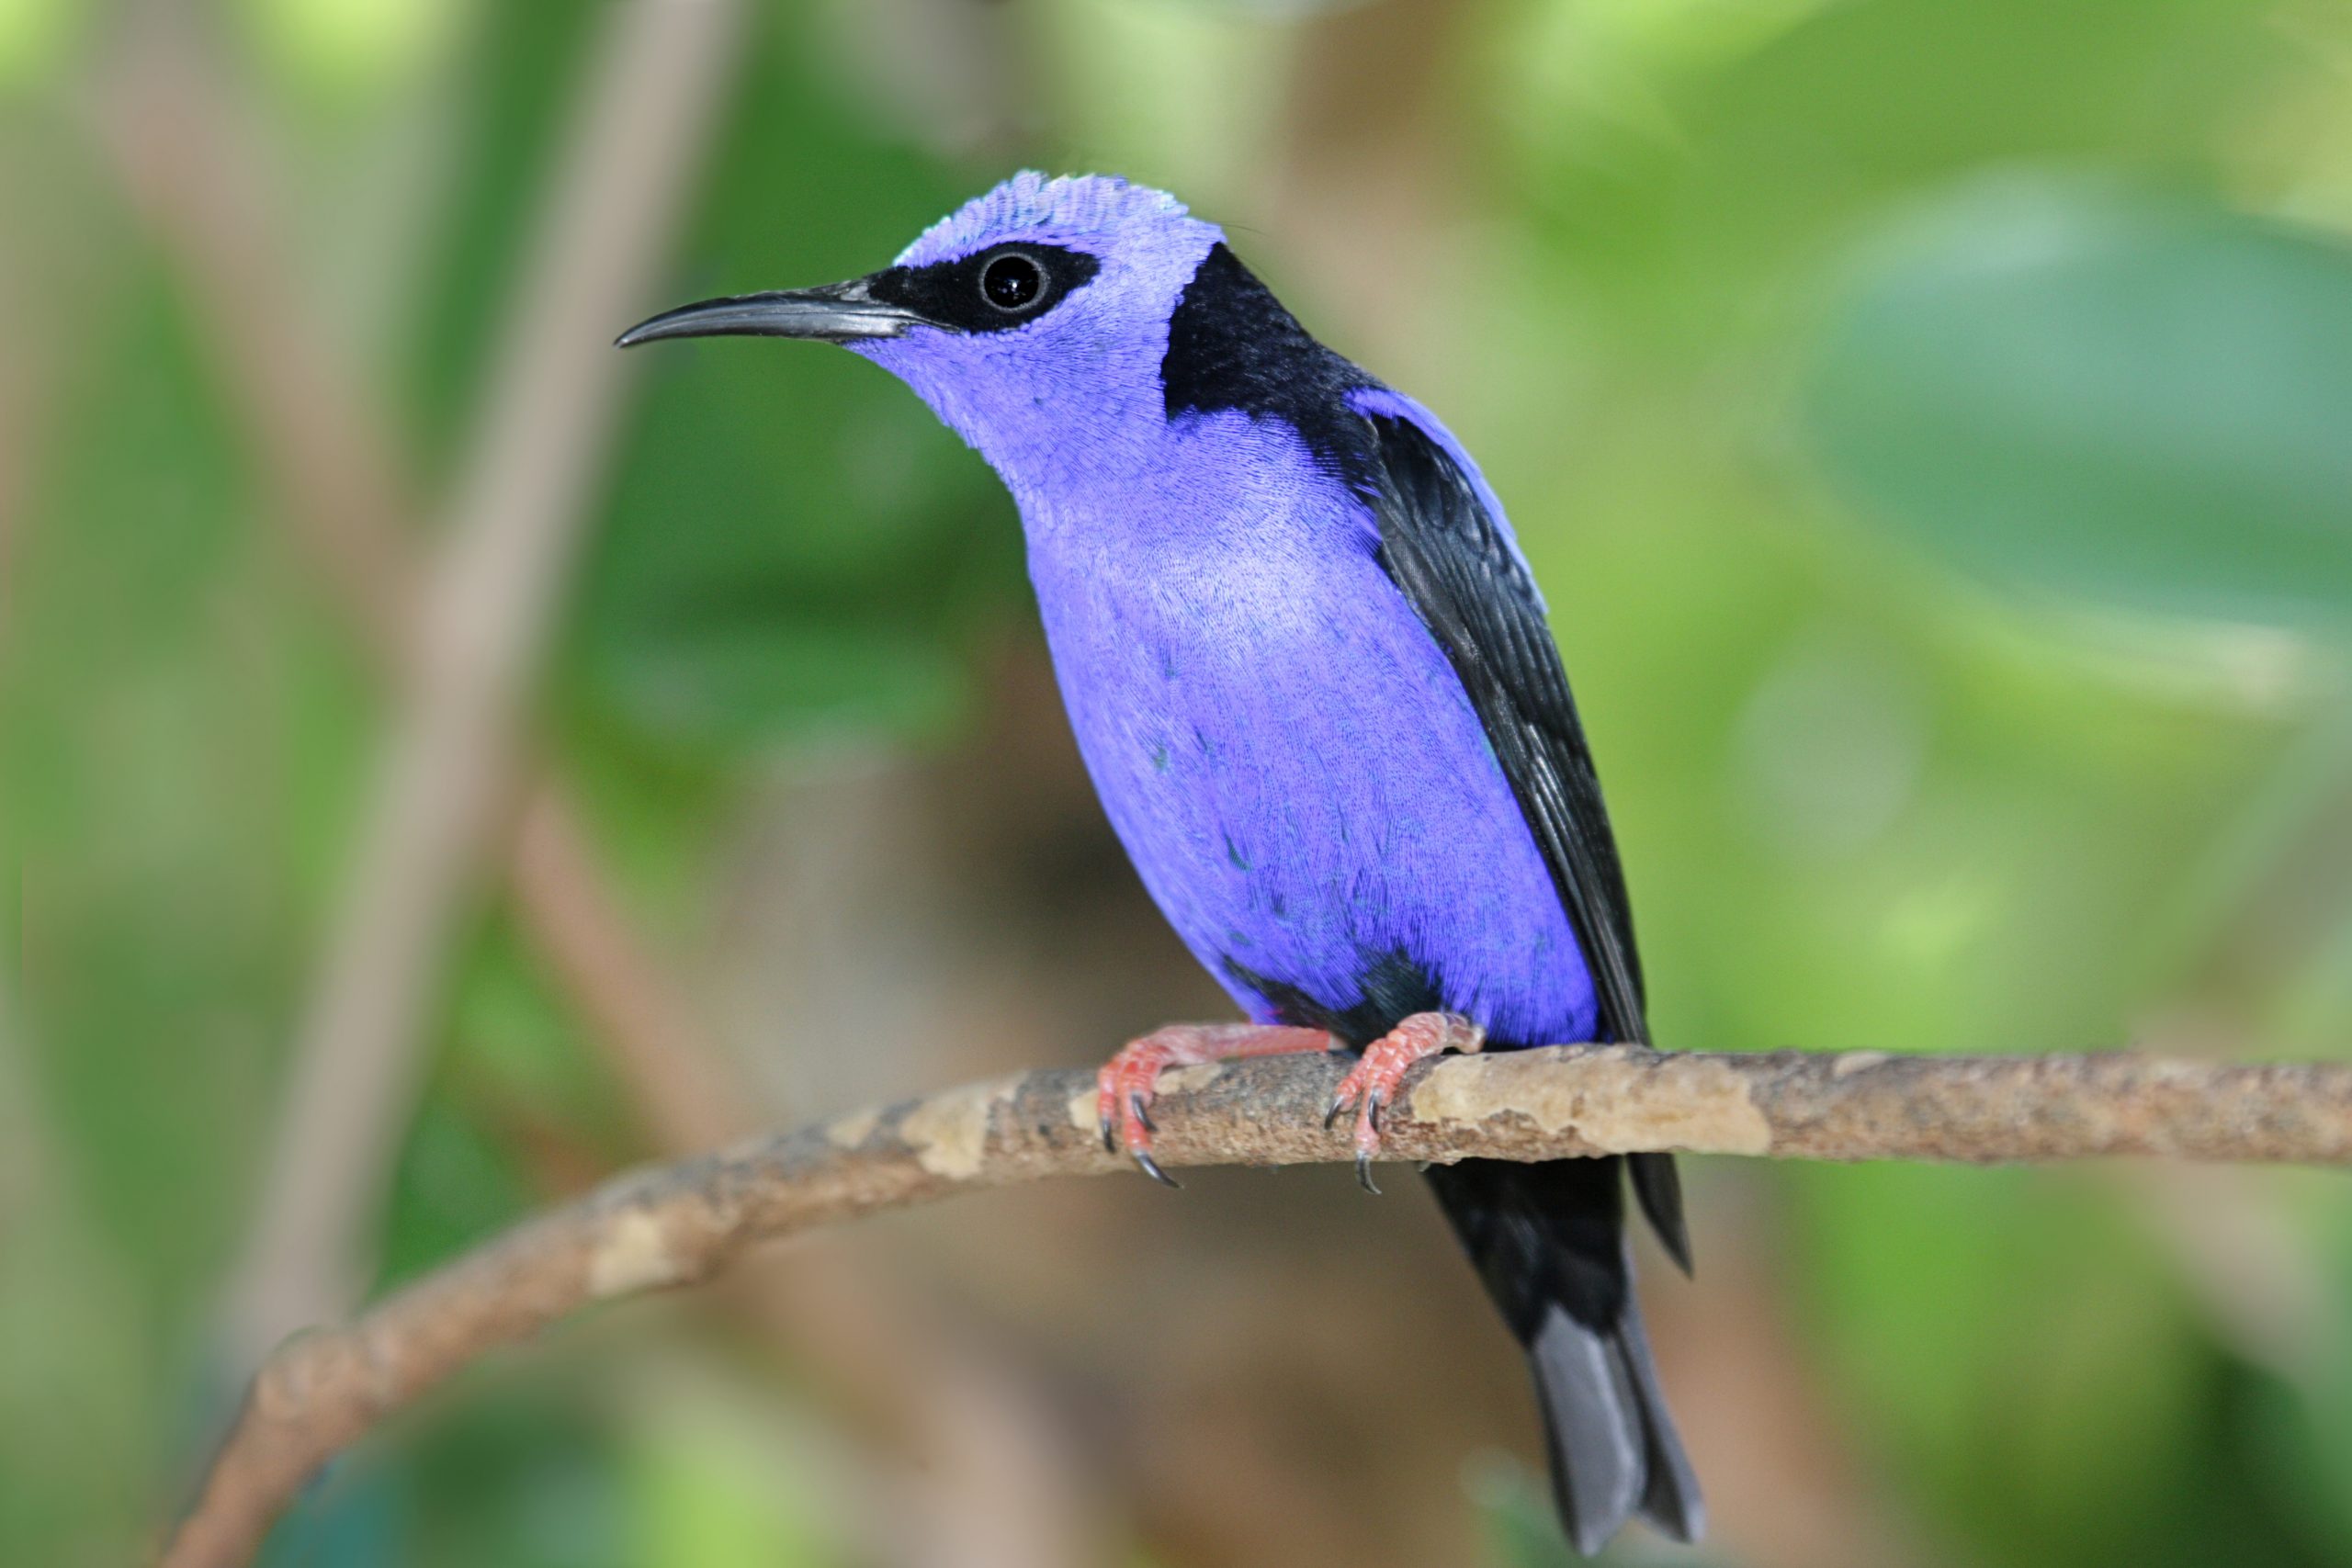 Red-legged Honeycreeper perched on a branch